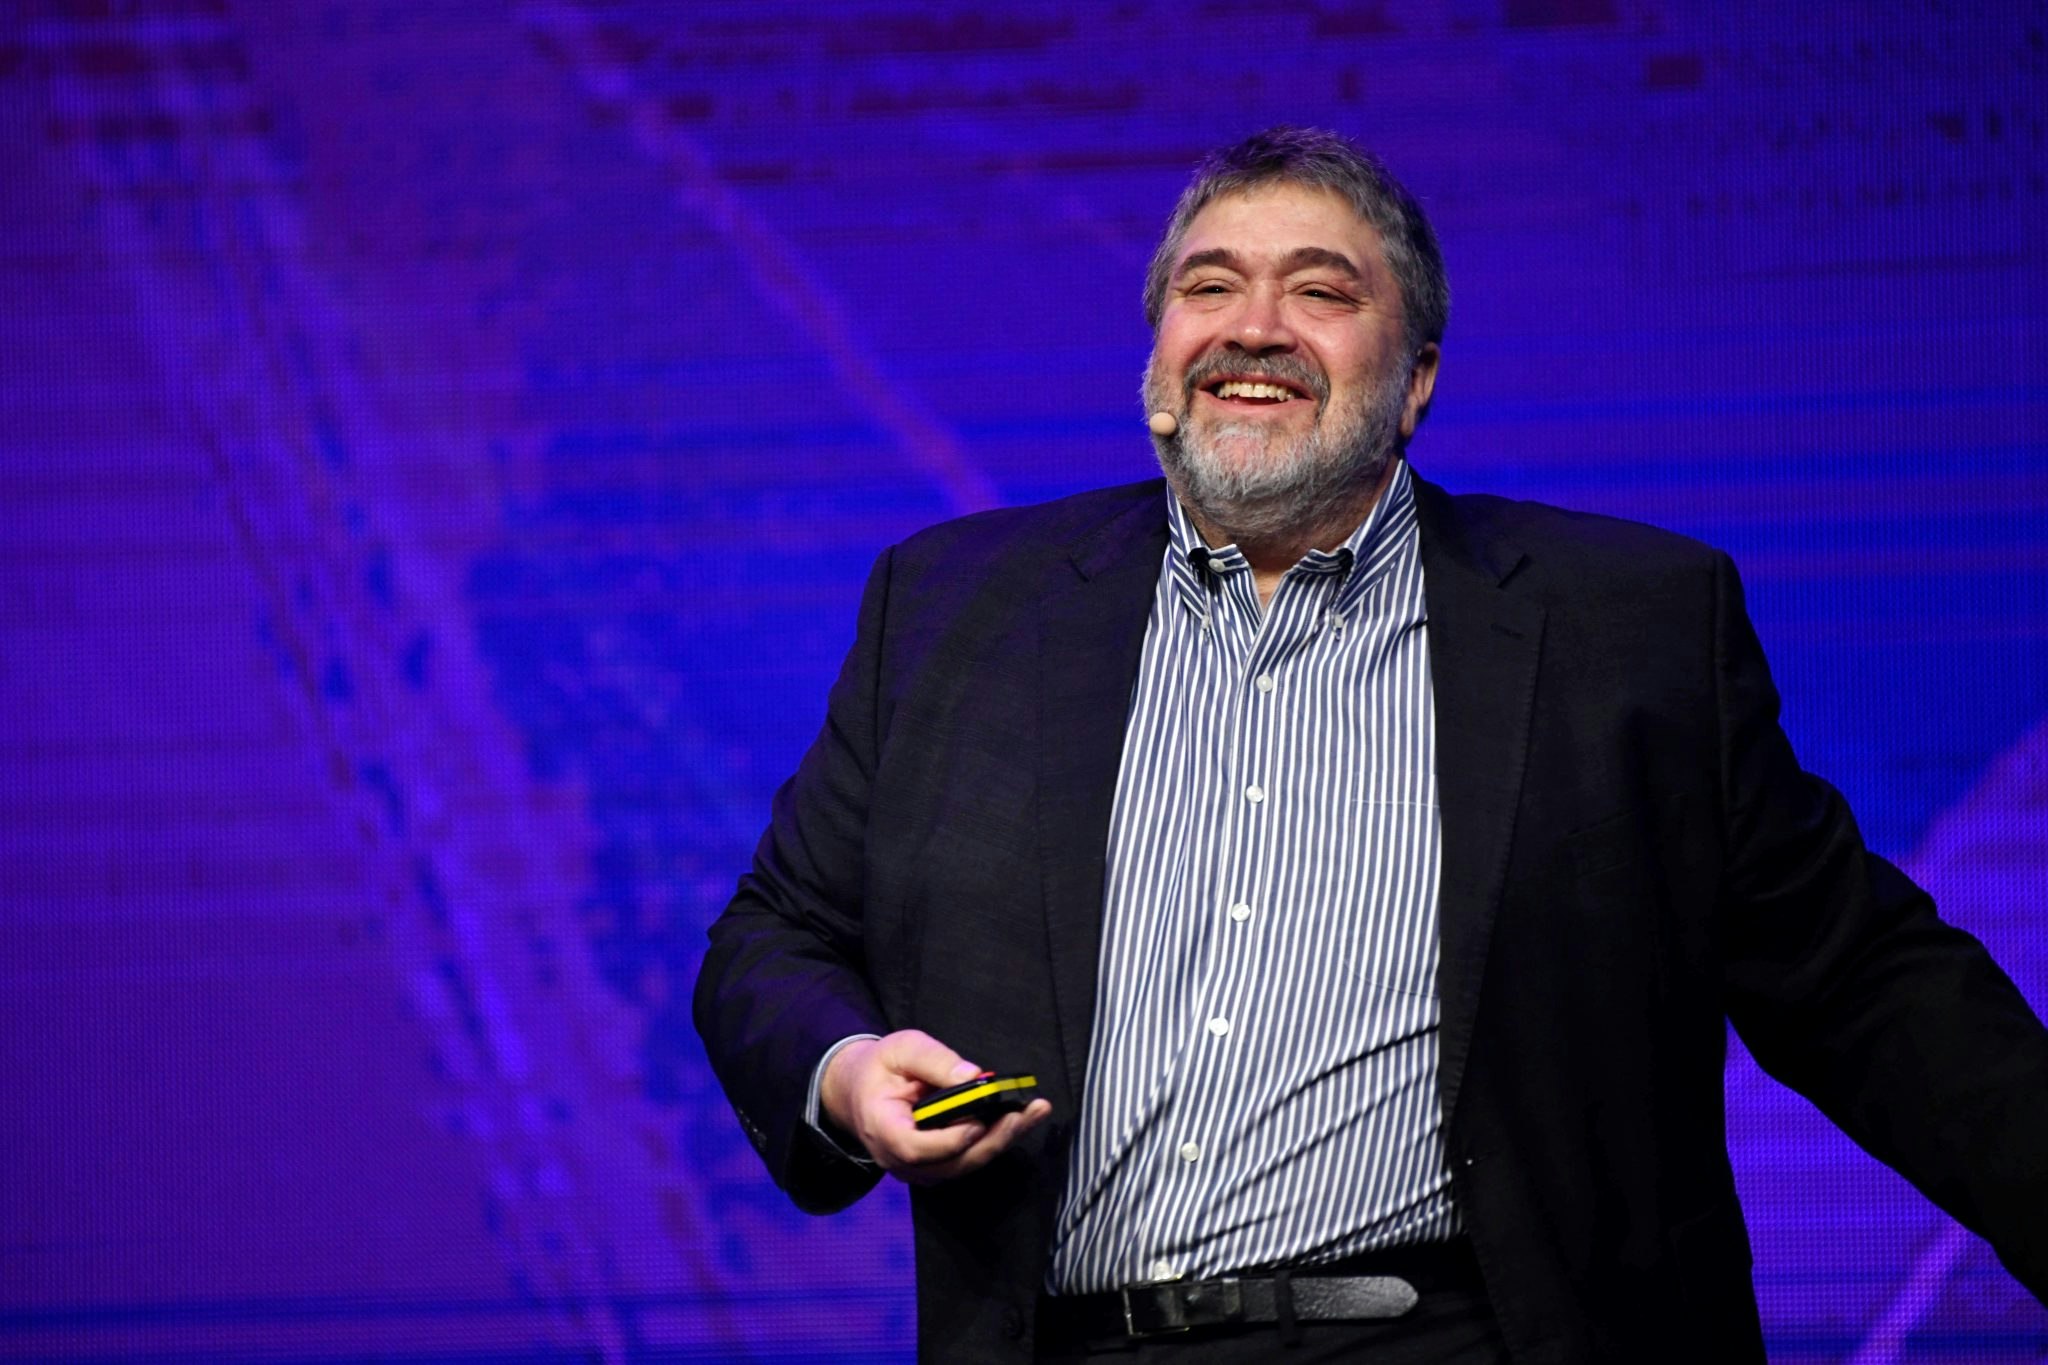 Jon Medved, the founder and CEO of OurCrowd